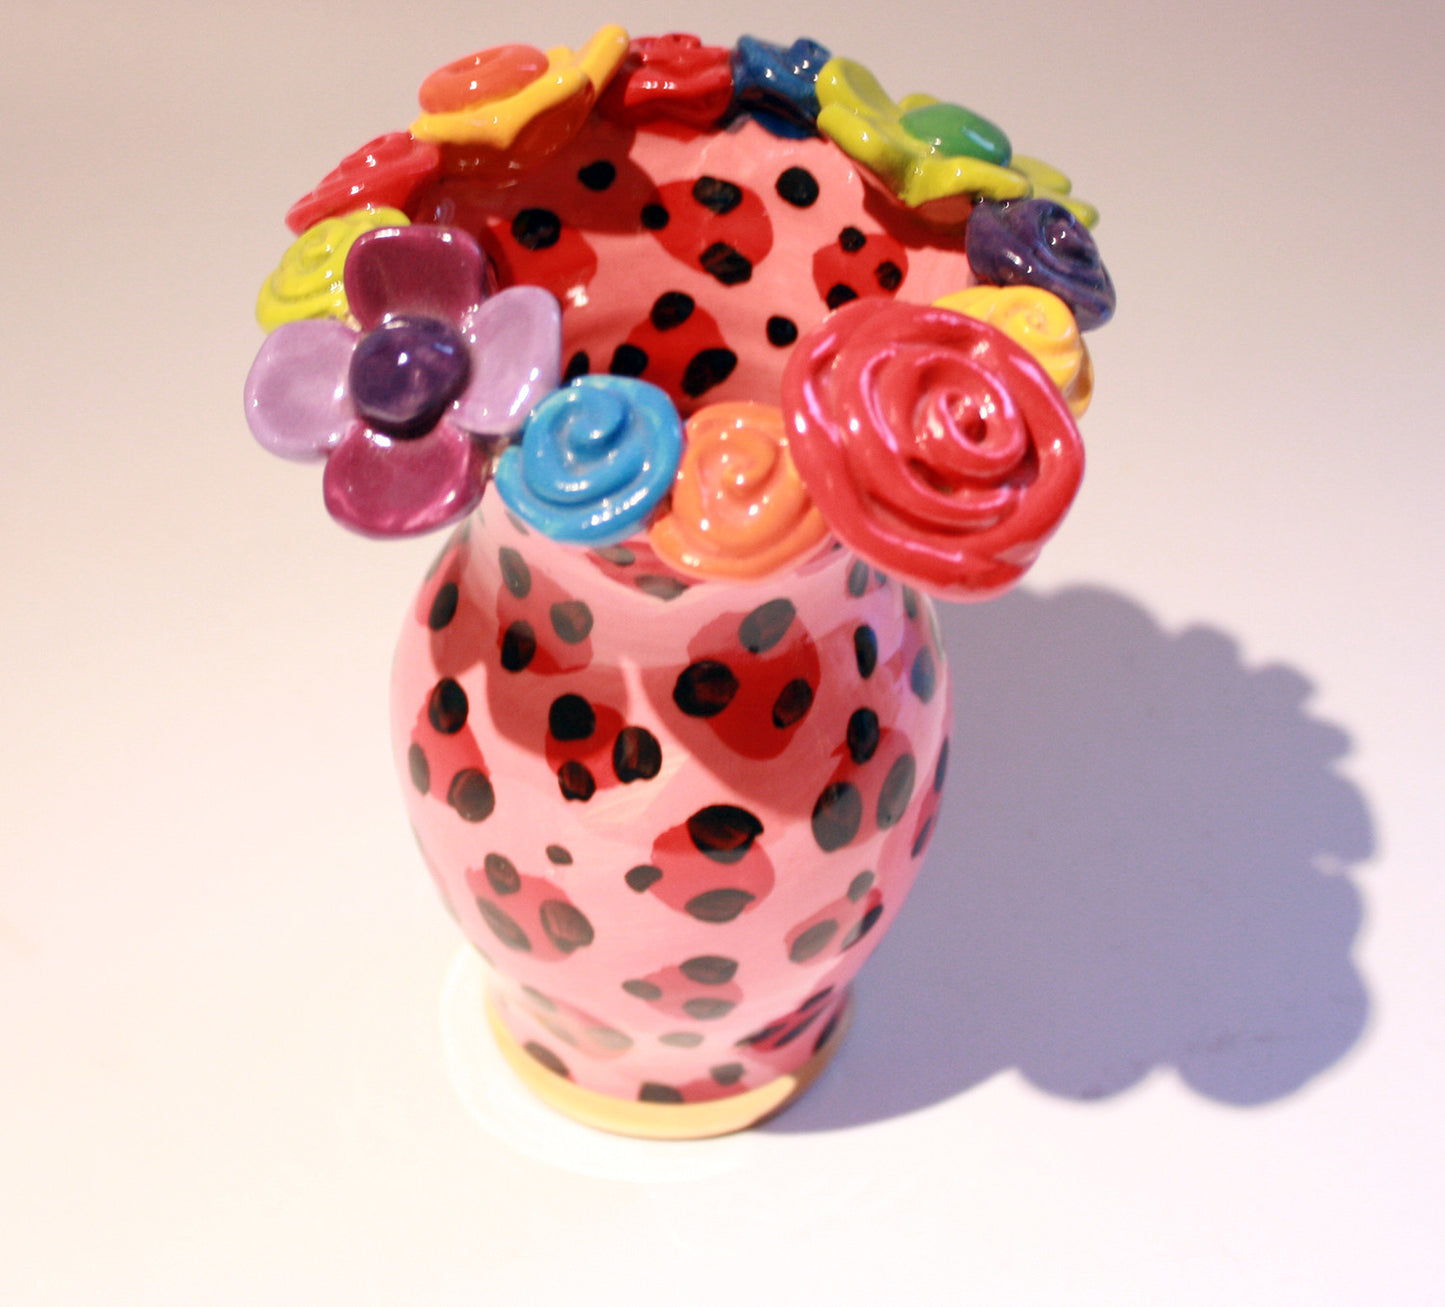 Tiny Multiflower Encrusted Vase "Red Leopard" - MaryRoseYoung